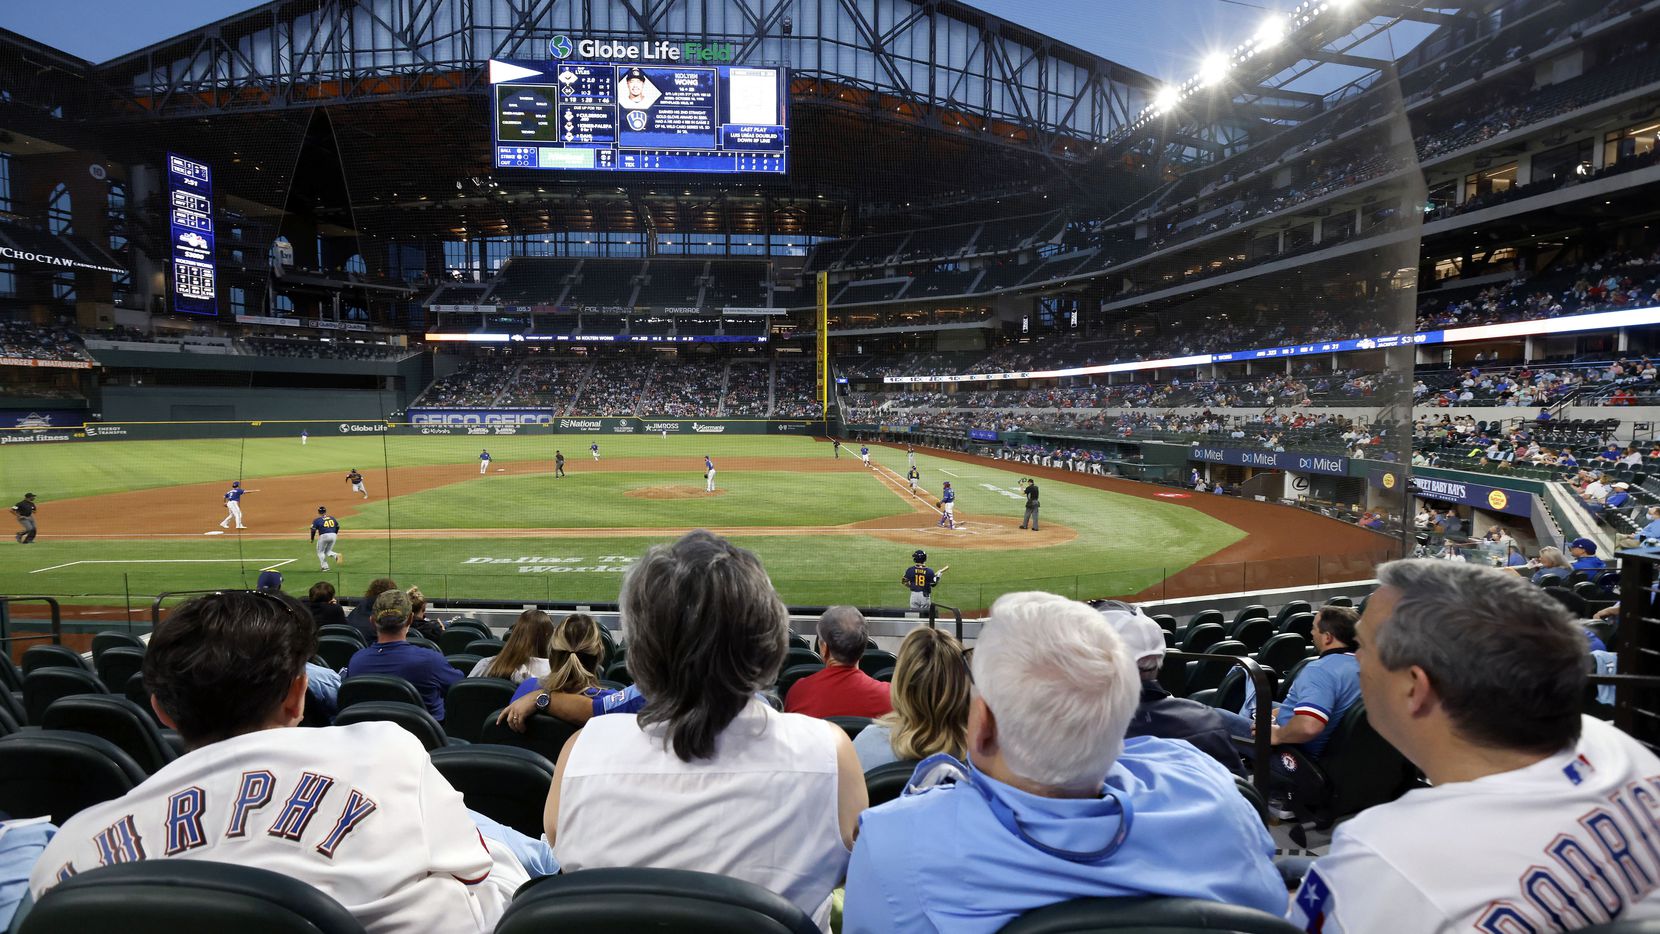 Texas Rangers fans for the first time take in an evening exhibition game at Globe Life Field in Arlington, Texas. The Rangers were playing the Milwaukee Brewers in an exhibition game, Monday, March 29, 2020.